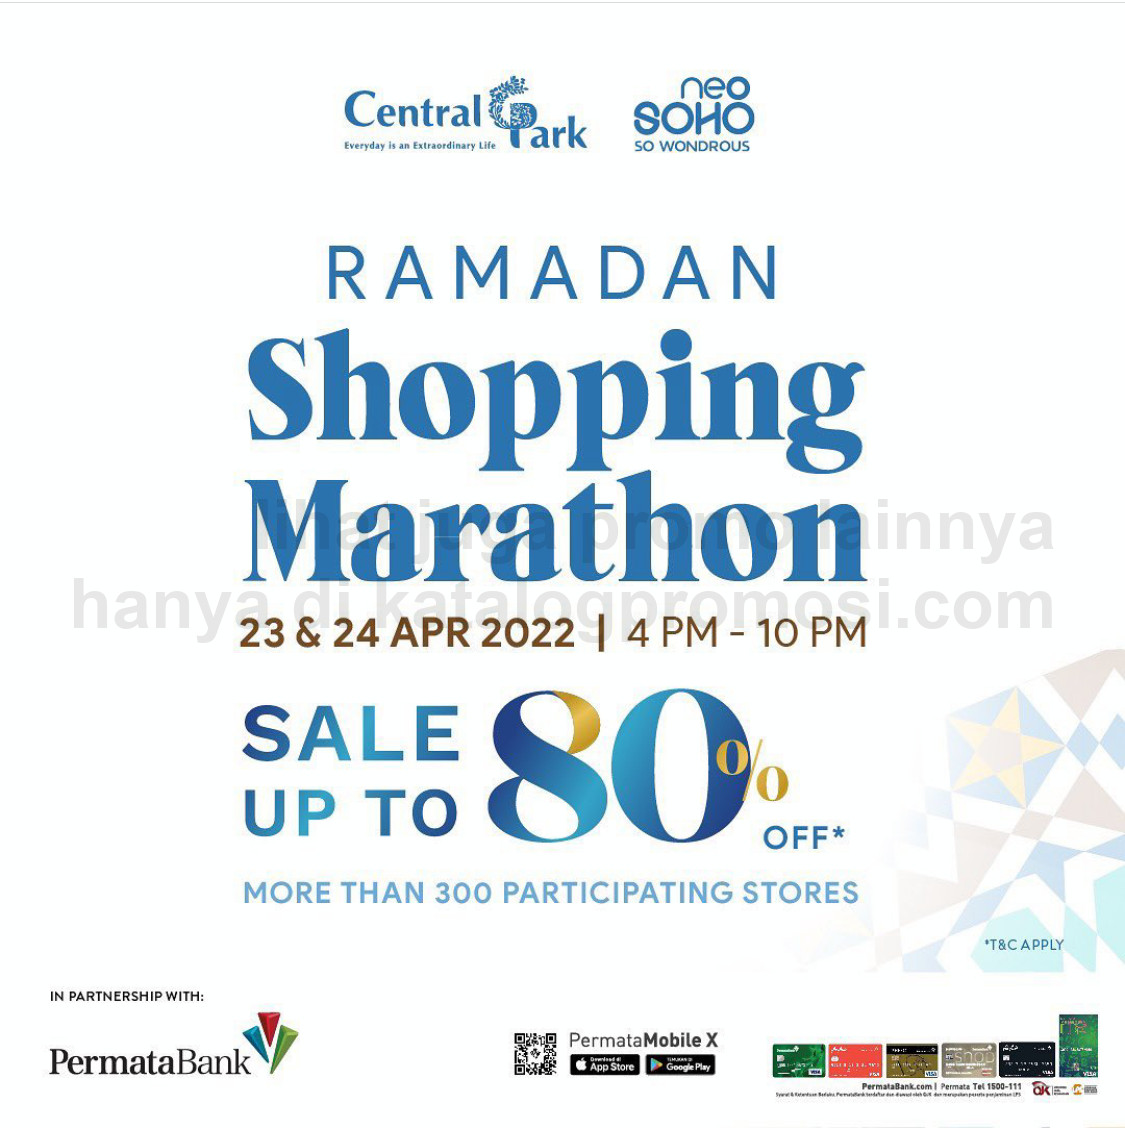 CENTRAL PARK MALL RAMADHAN SHOPPING MARATHON SALE up to 80% off